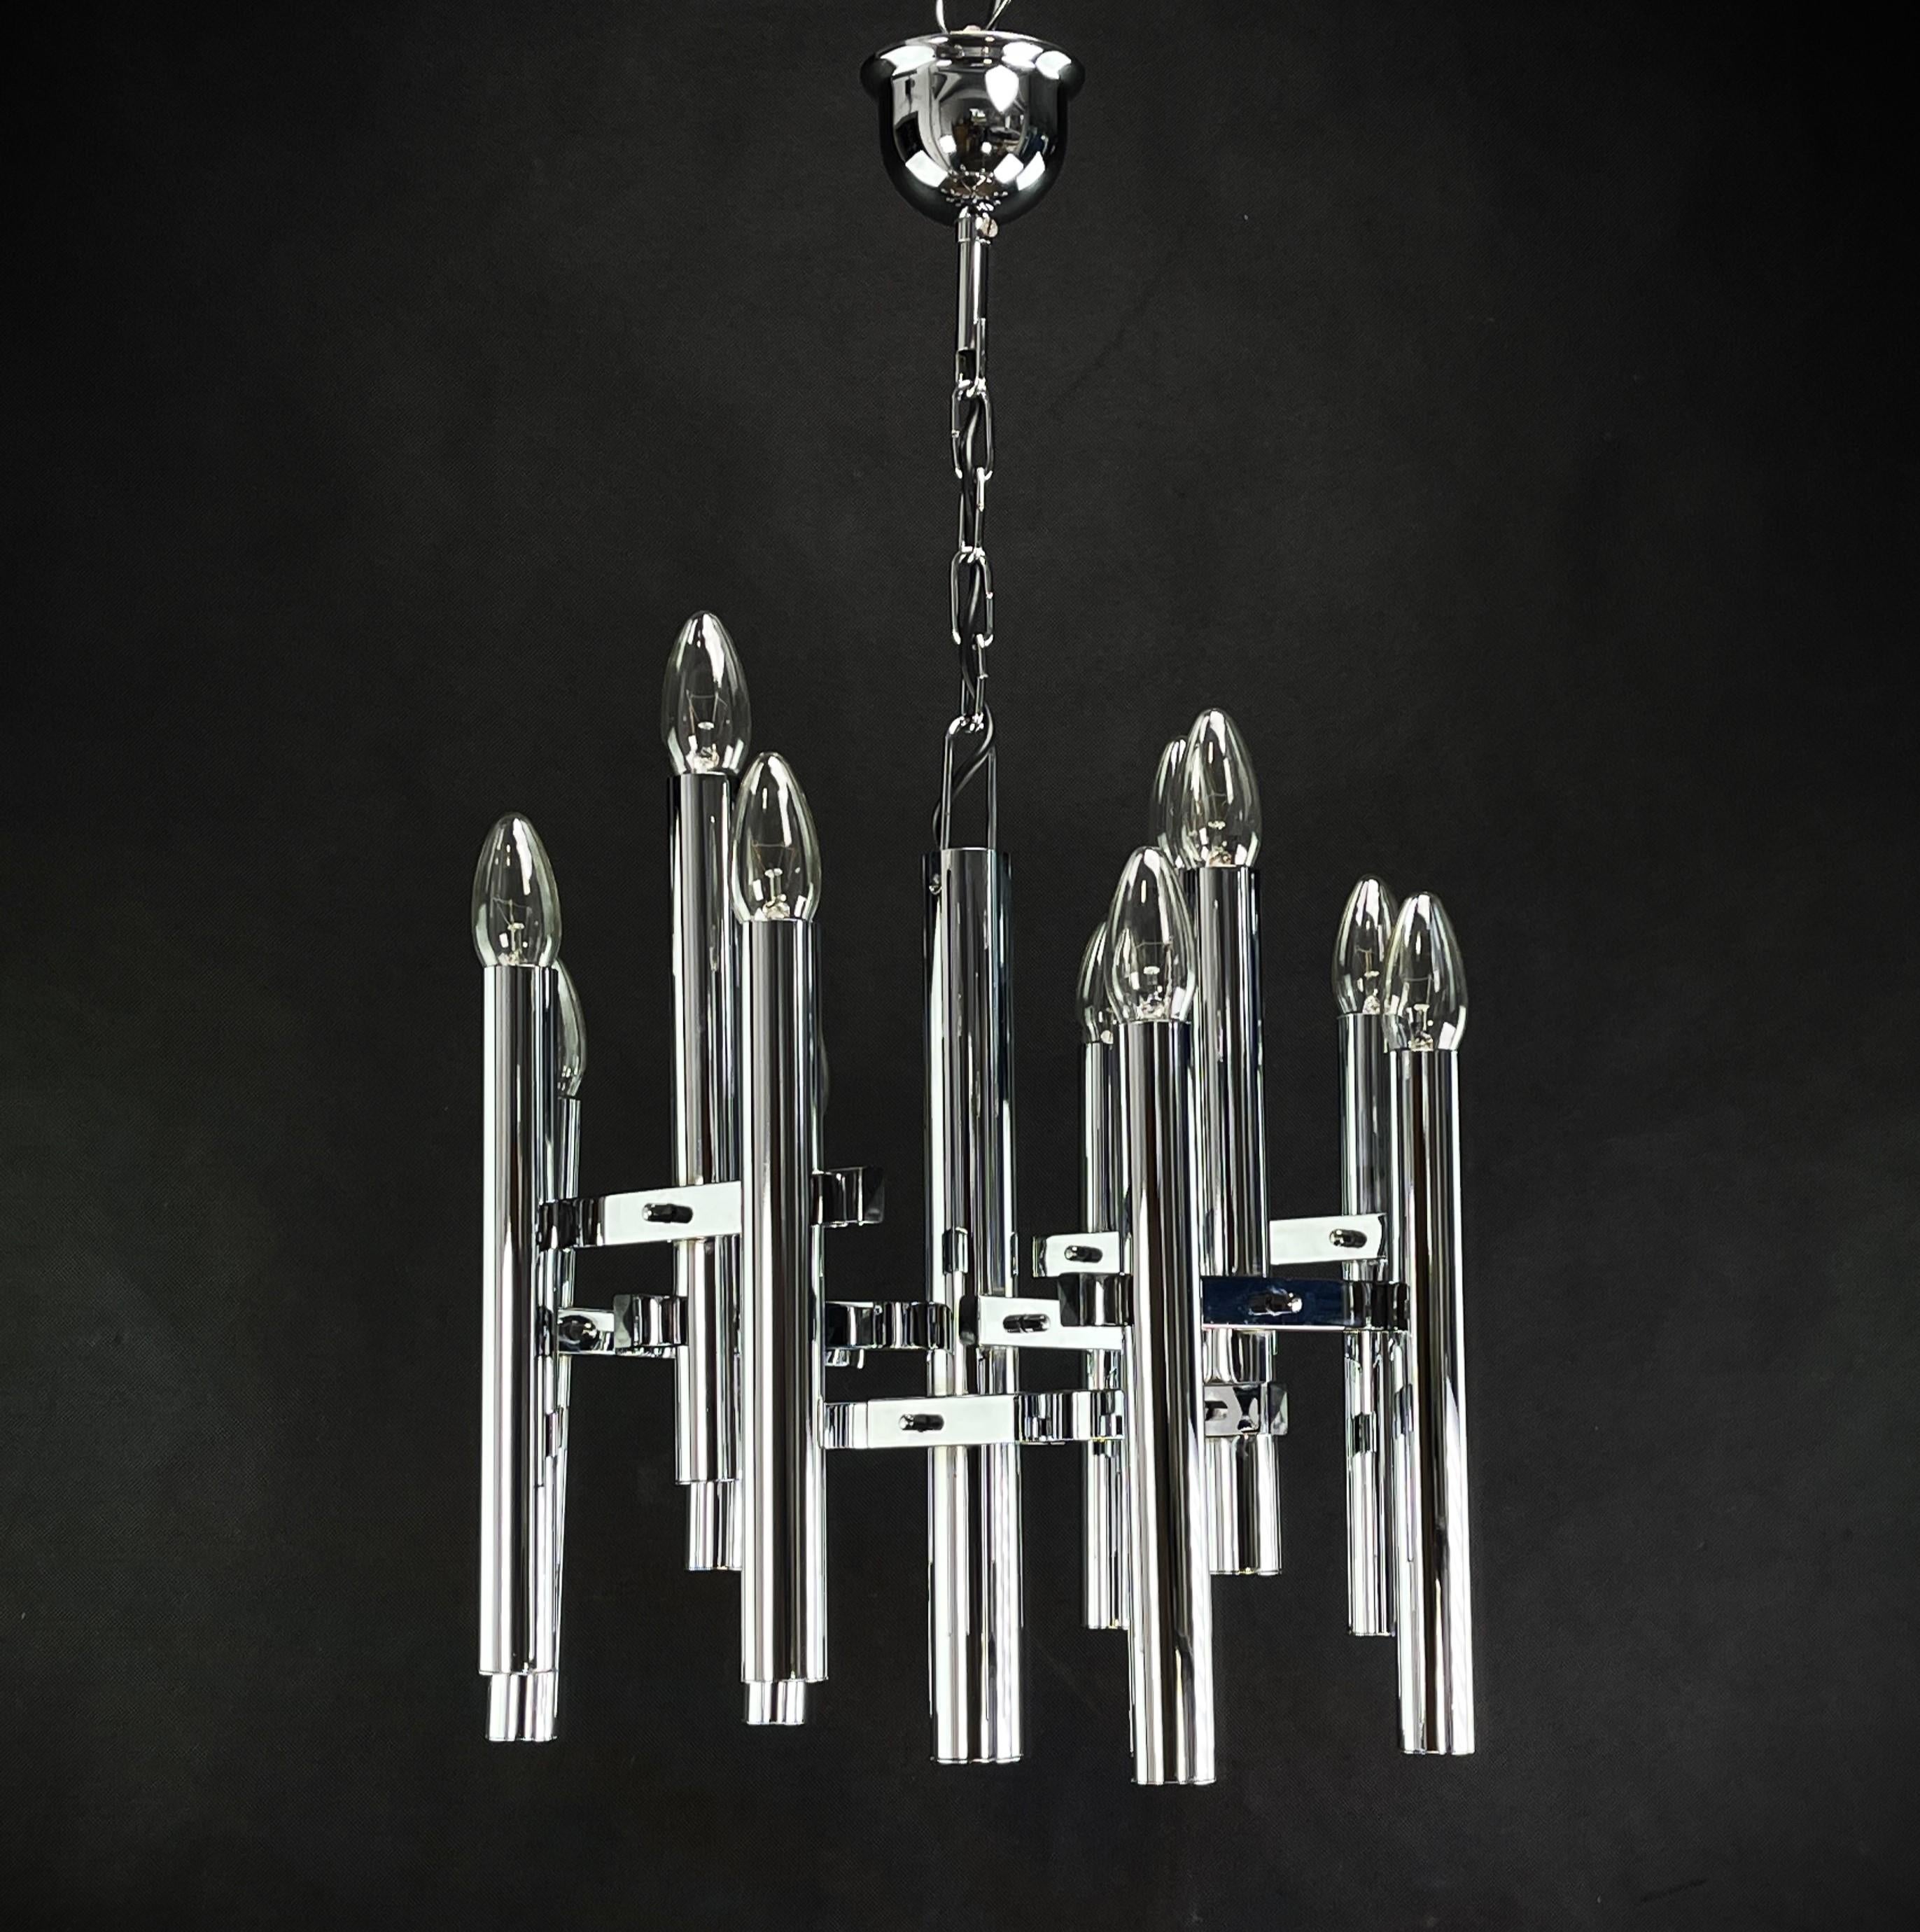 Sputnik ceiling lamp by Sciolary - 1970s

This large Sputnik lamp is a real design classic from the 60s/70s. The lounge lamp by Sciolari is an original and gives a pleasant light. The Italian lamp is made out of chrome plated metal. 

The